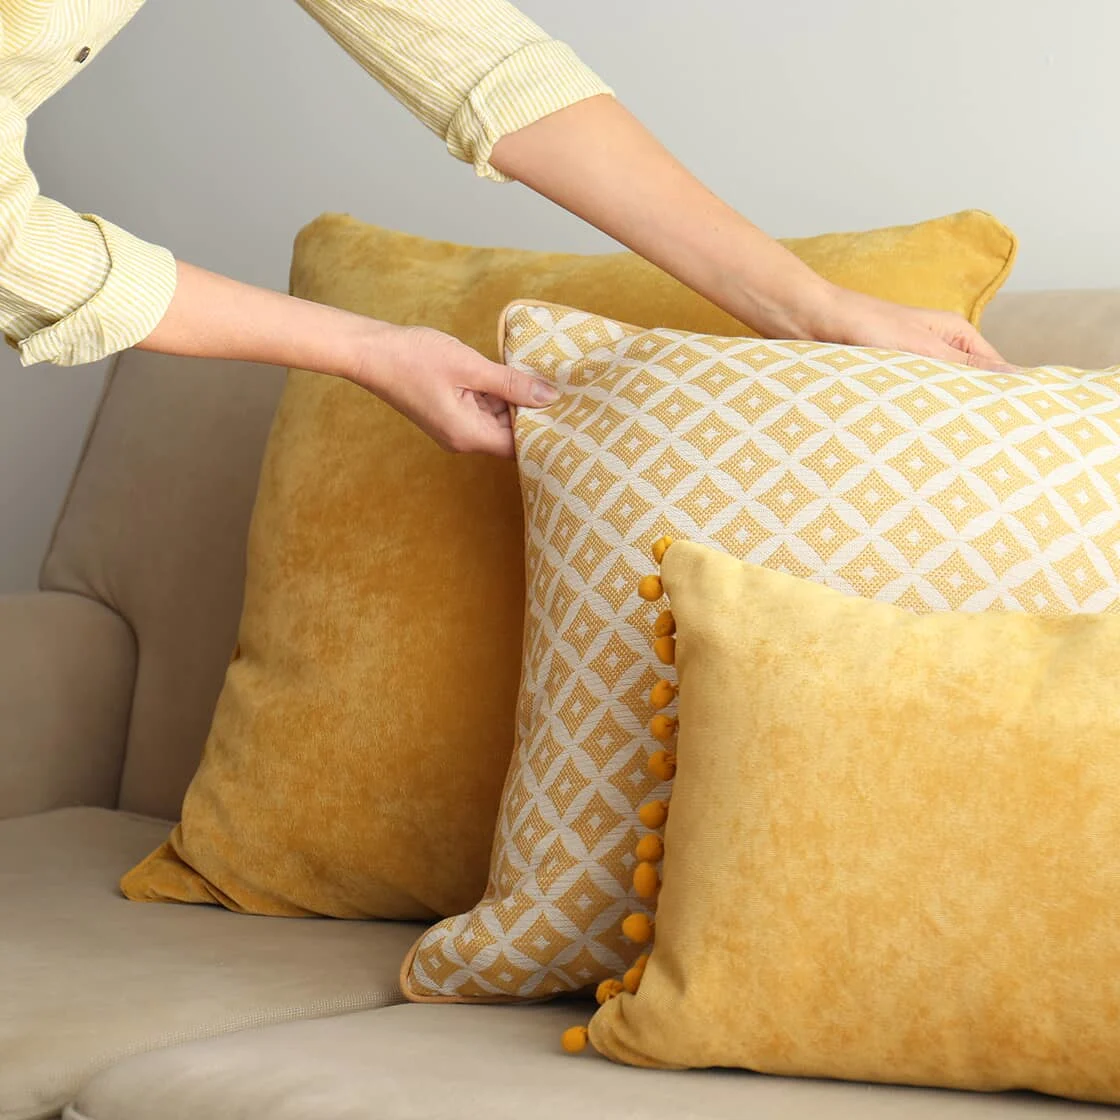 positioning pillows